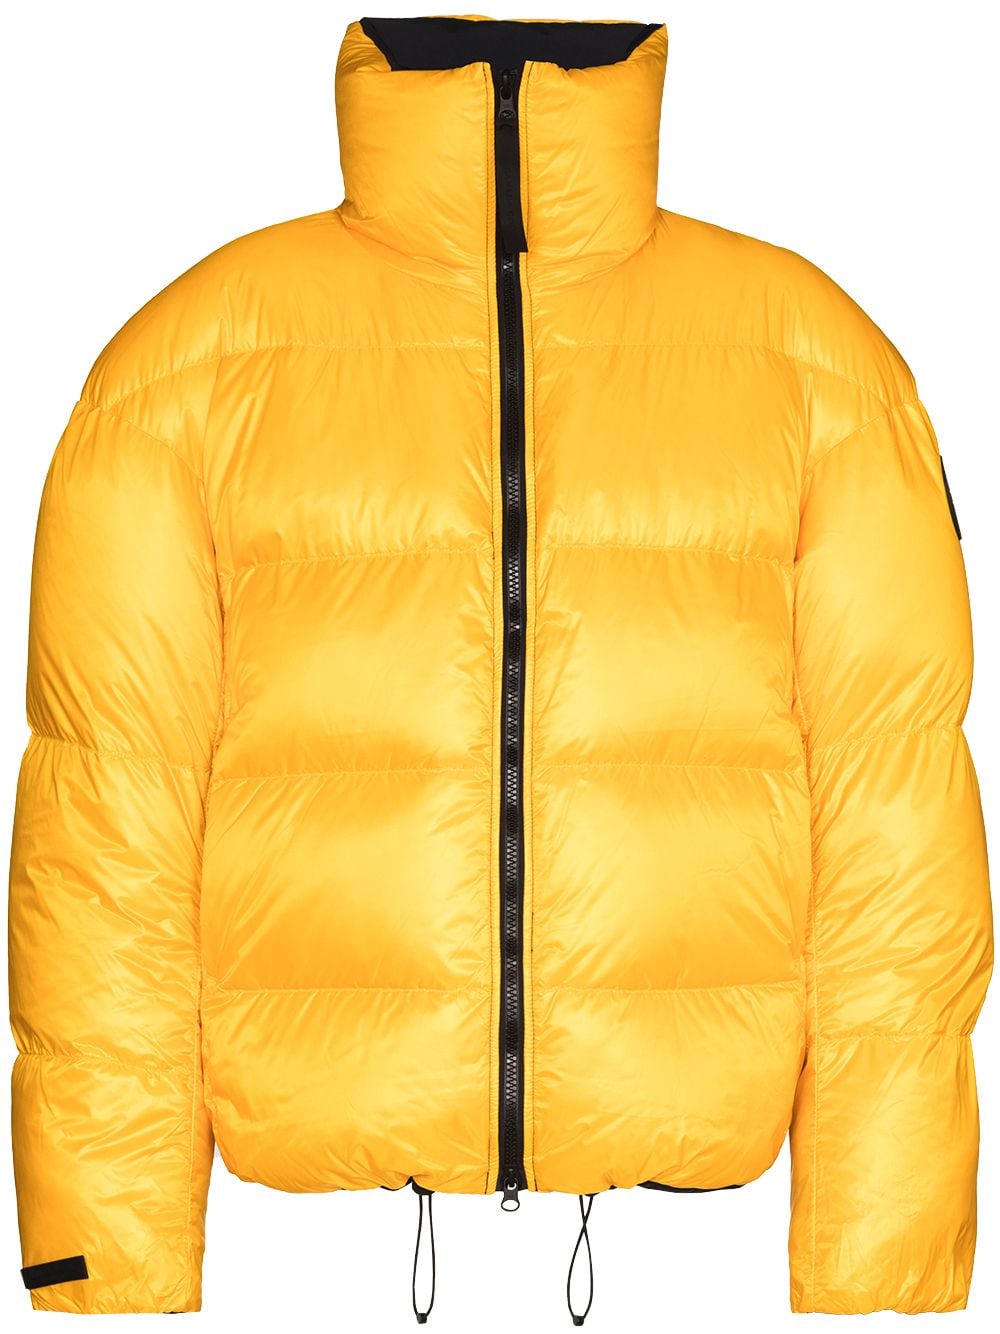 Contact Us - Angel Jackets In Canada